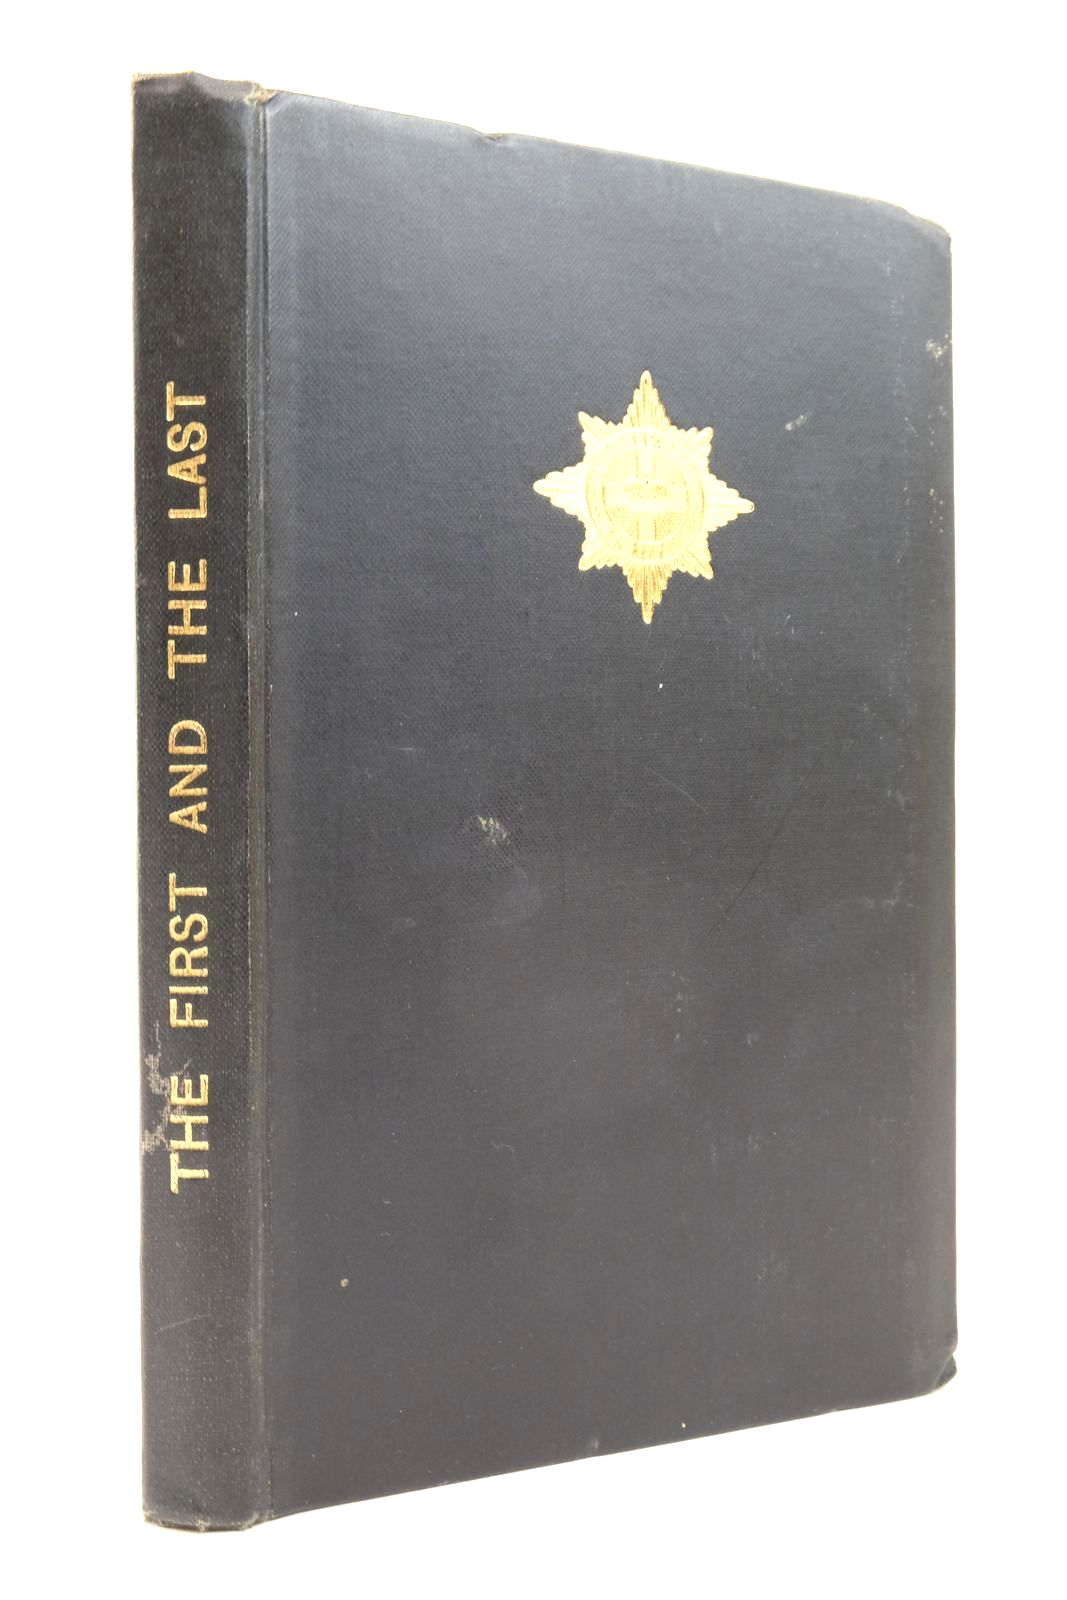 Photo of THE FIRST AND THE LAST: THE STORY OF THE 4TH/7TH ROYAL DRAGOON GUARDS 1939 - 1945 written by Stirling, J.D.P. illustrated by Oxley, S. published by Art & Educational Publishers Limited (STOCK CODE: 2137728)  for sale by Stella & Rose's Books